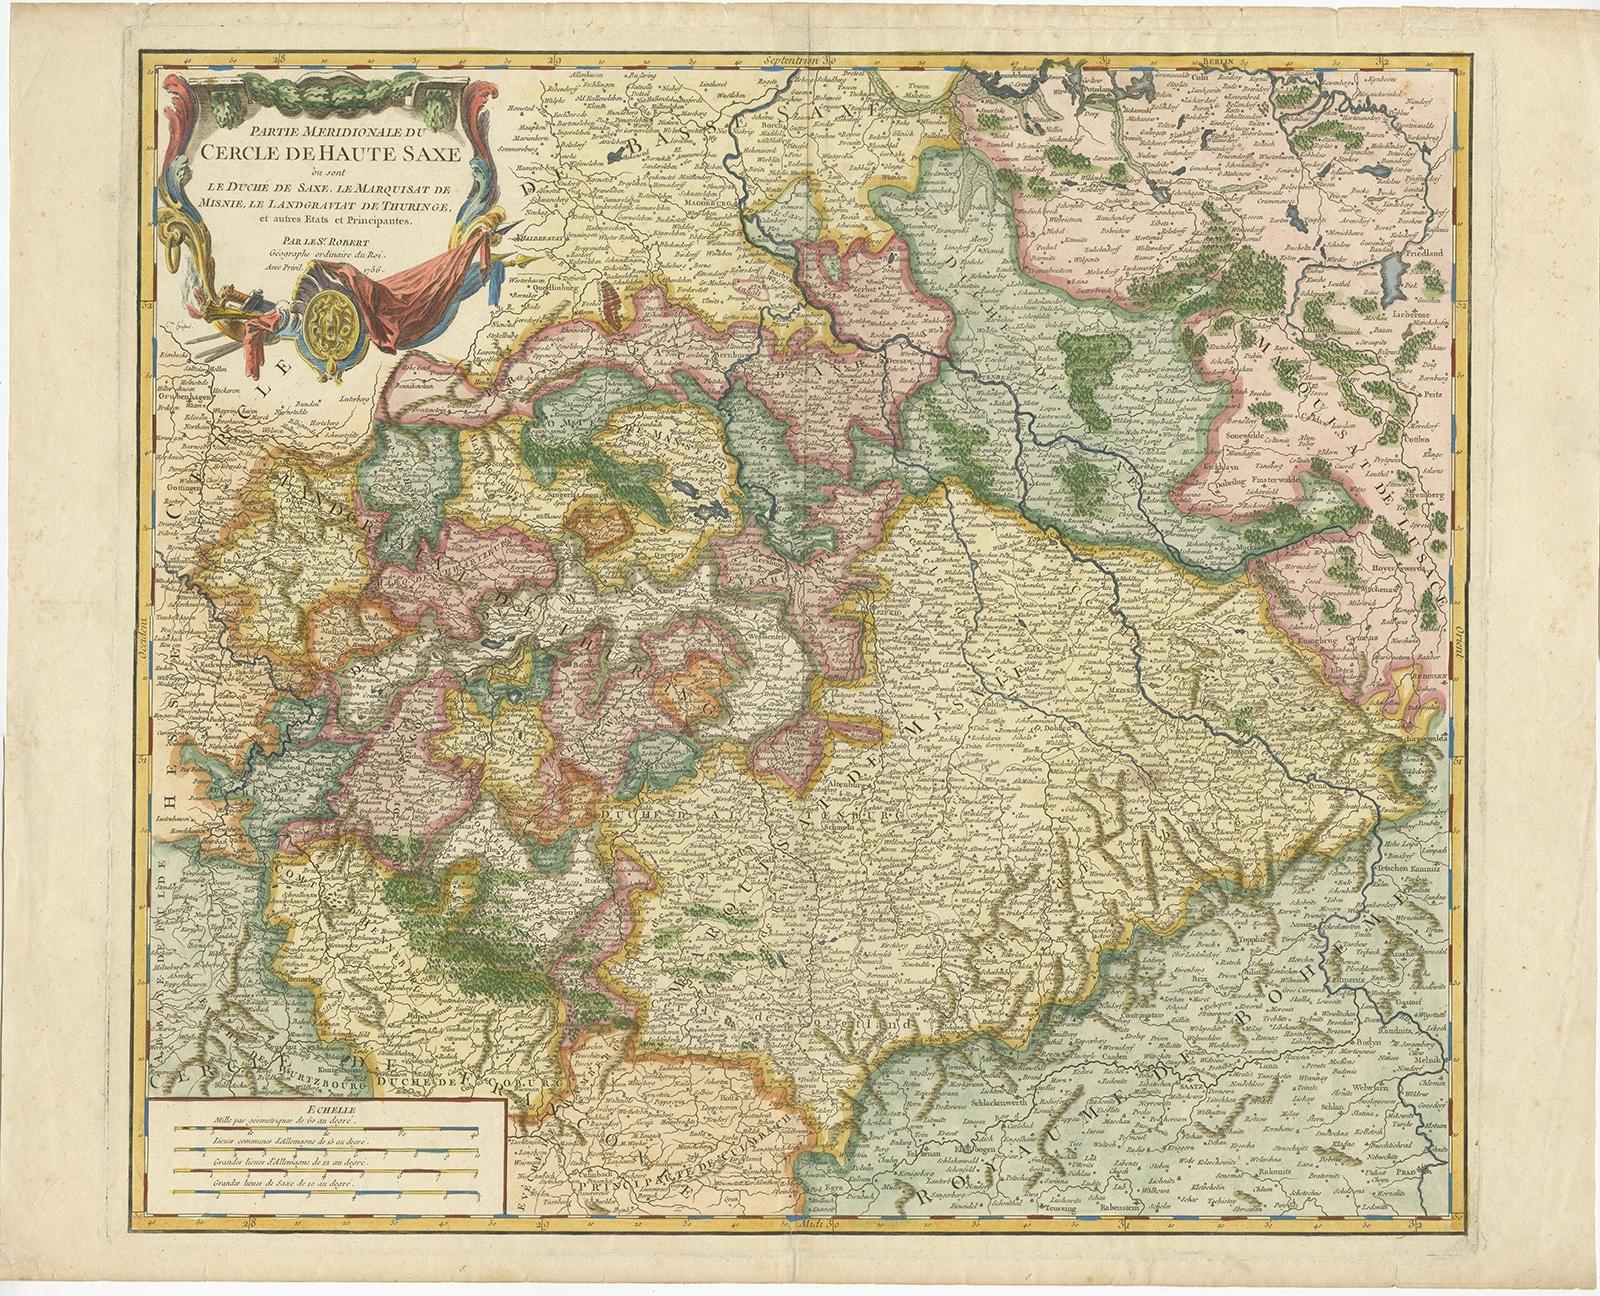 Antique map titled 'Partie Meridionale du cercle de Haute Saxe (..)'. 

Original antique map of upper Saxony, Germany. It was the name given to the majority of the German lands held by the House of Wettin, in what is now called Central